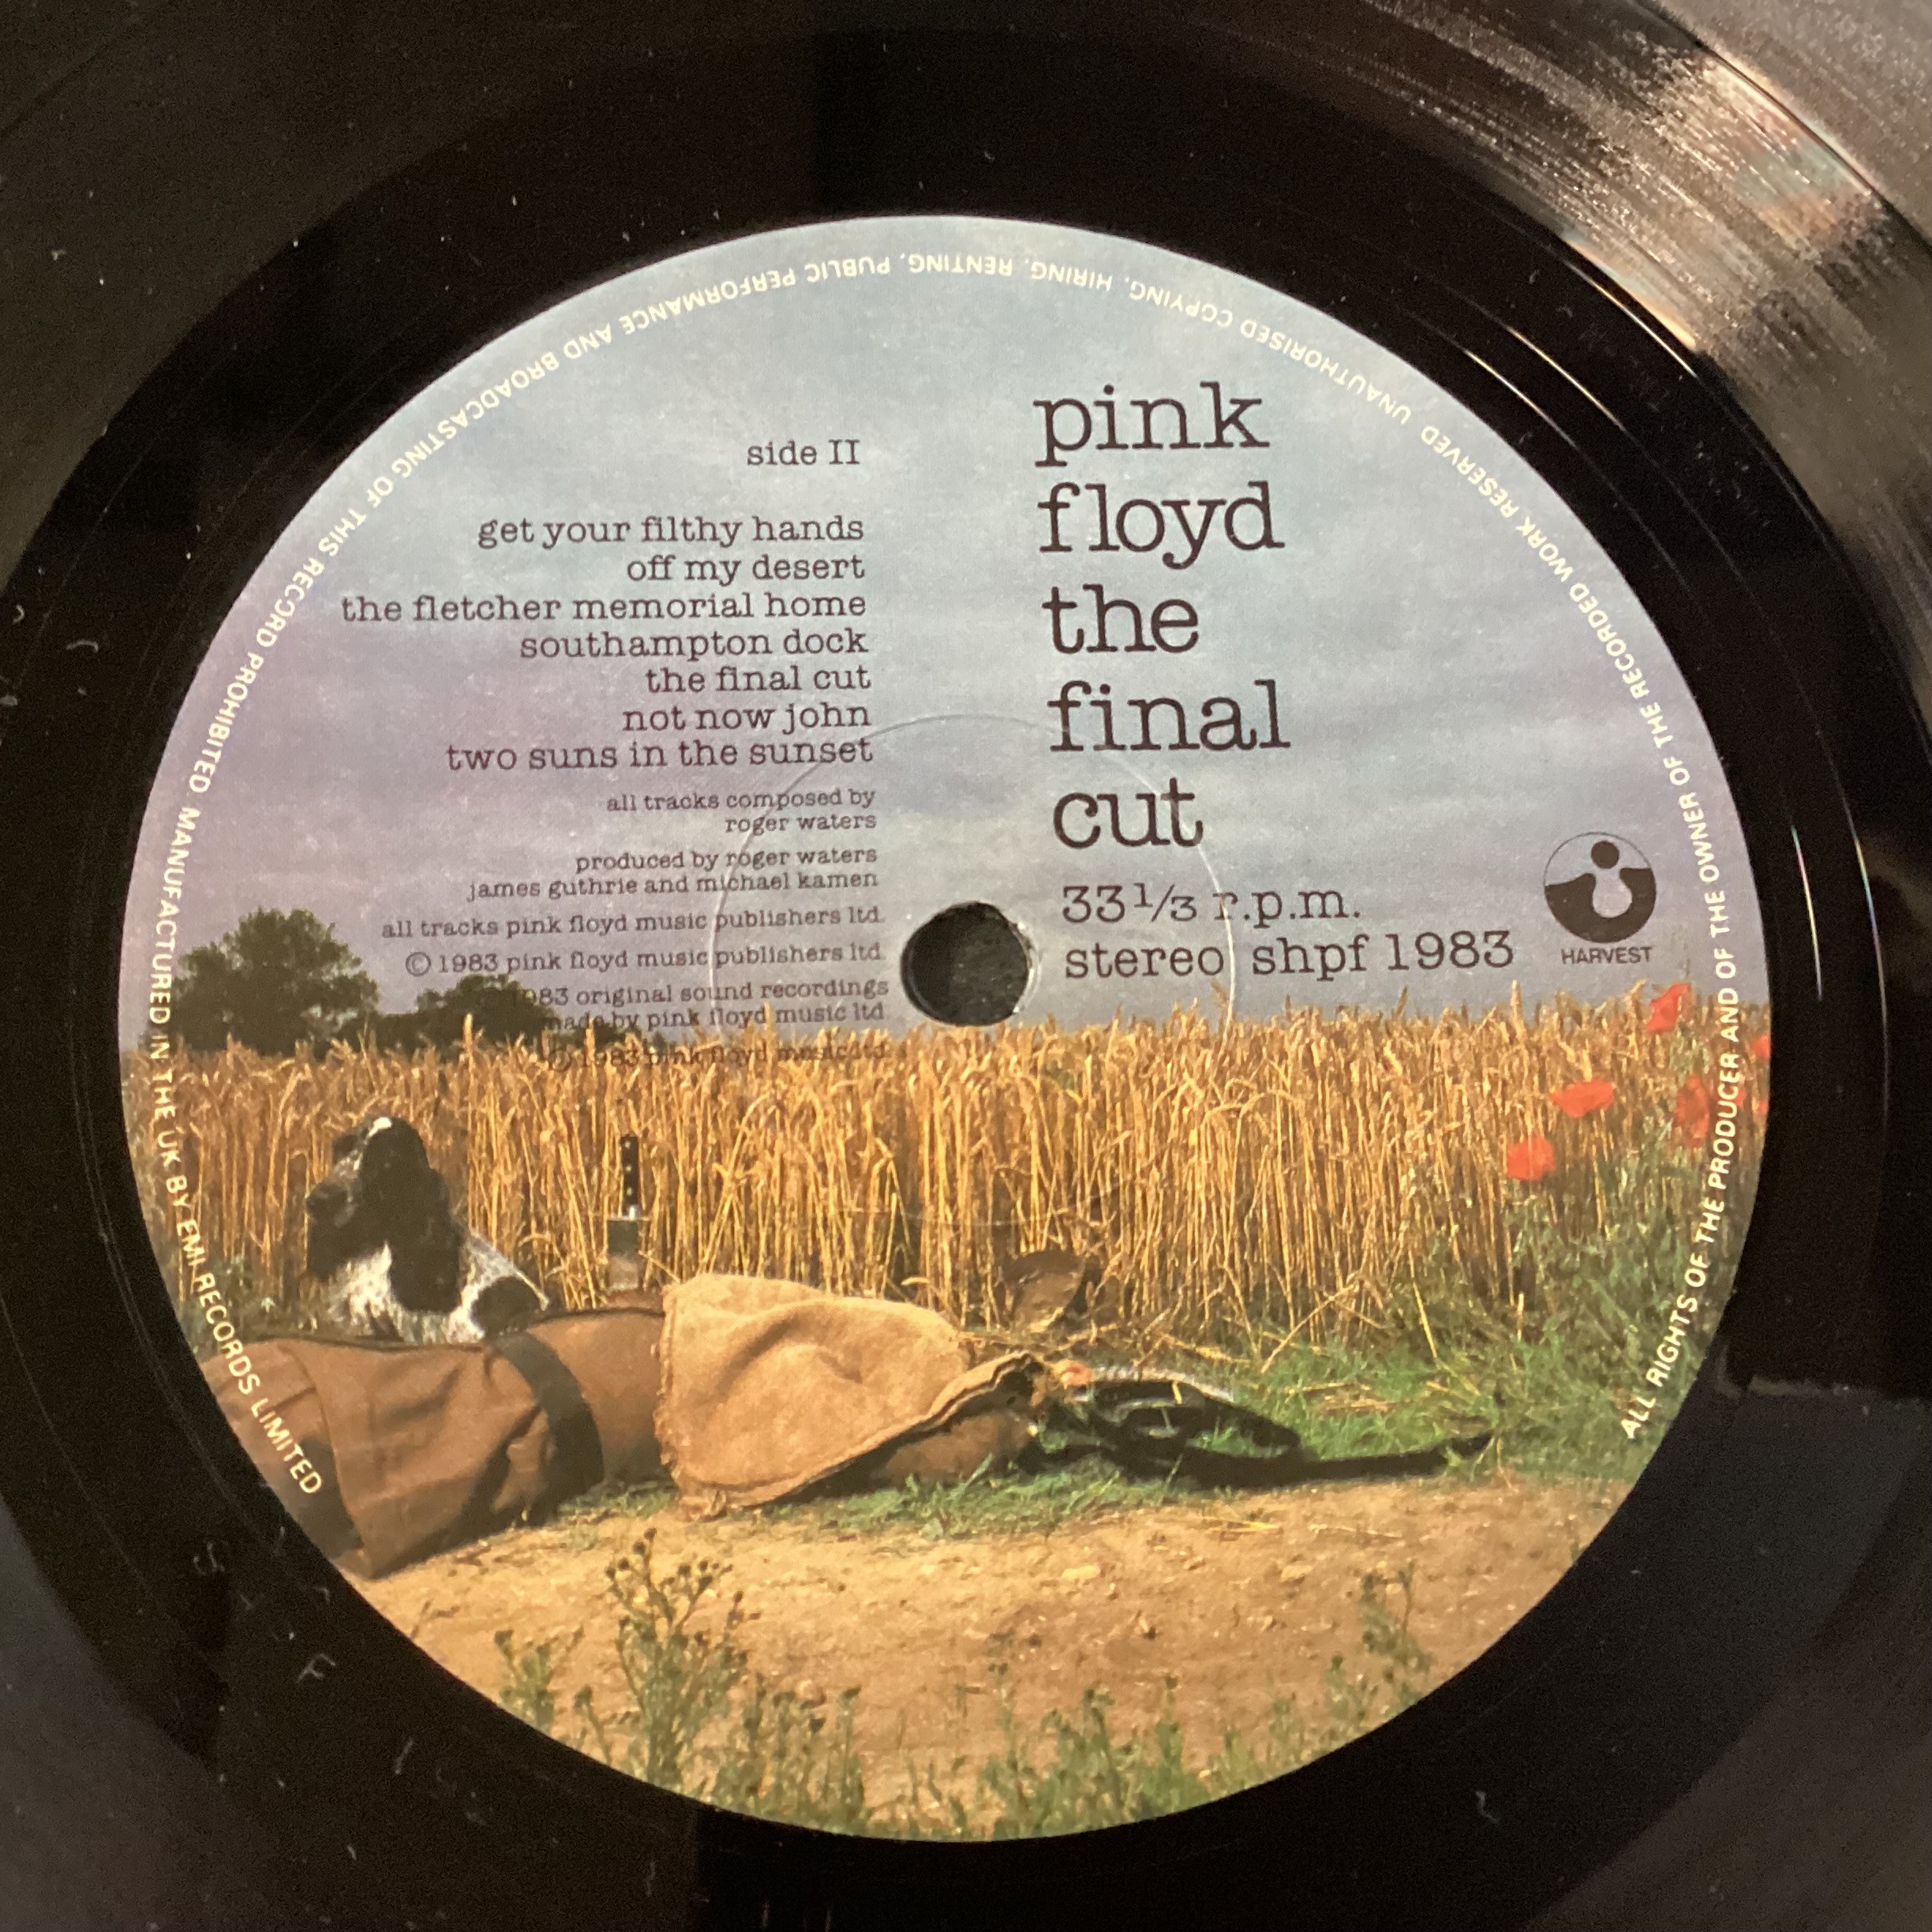 PINK FLOYD VINYL LP RECORDS X 2. Copies here include ‘The Wall’ double album on Harvest SHDW 411 - Image 8 of 9